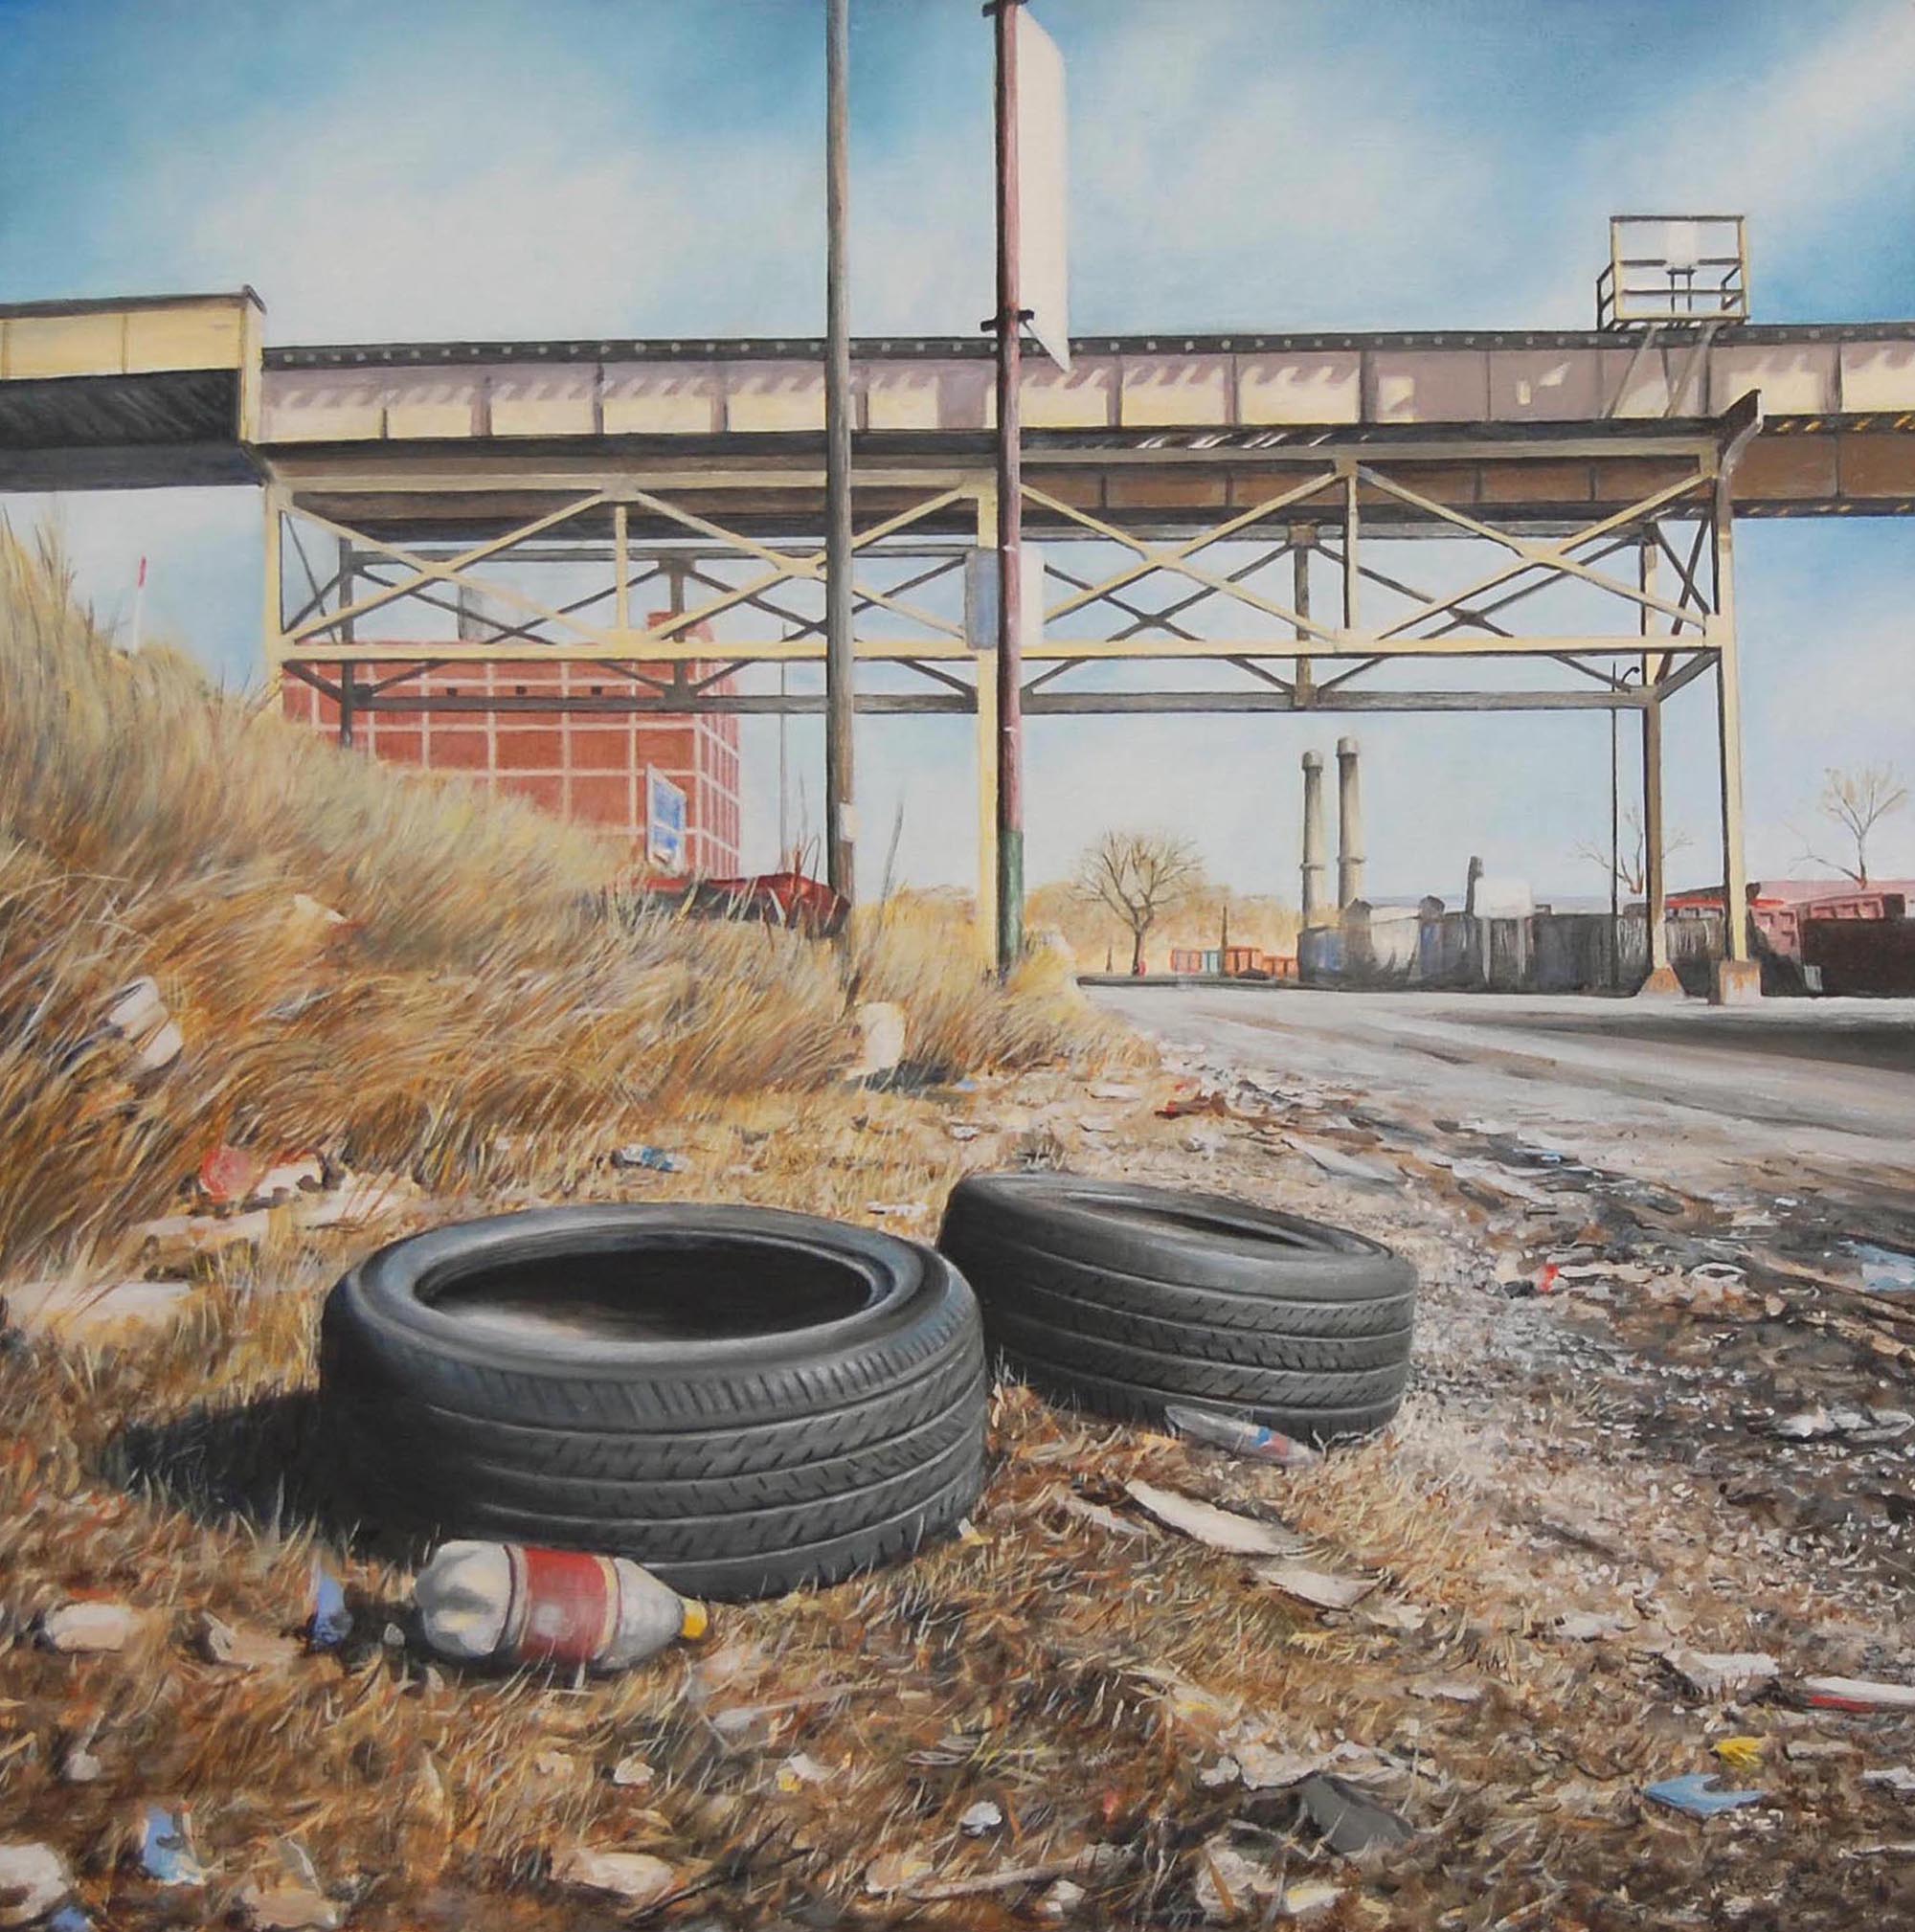   Garbage and Tires on the    West Side of Chicago   2011  Oil on canvas  20 x 20 inches    